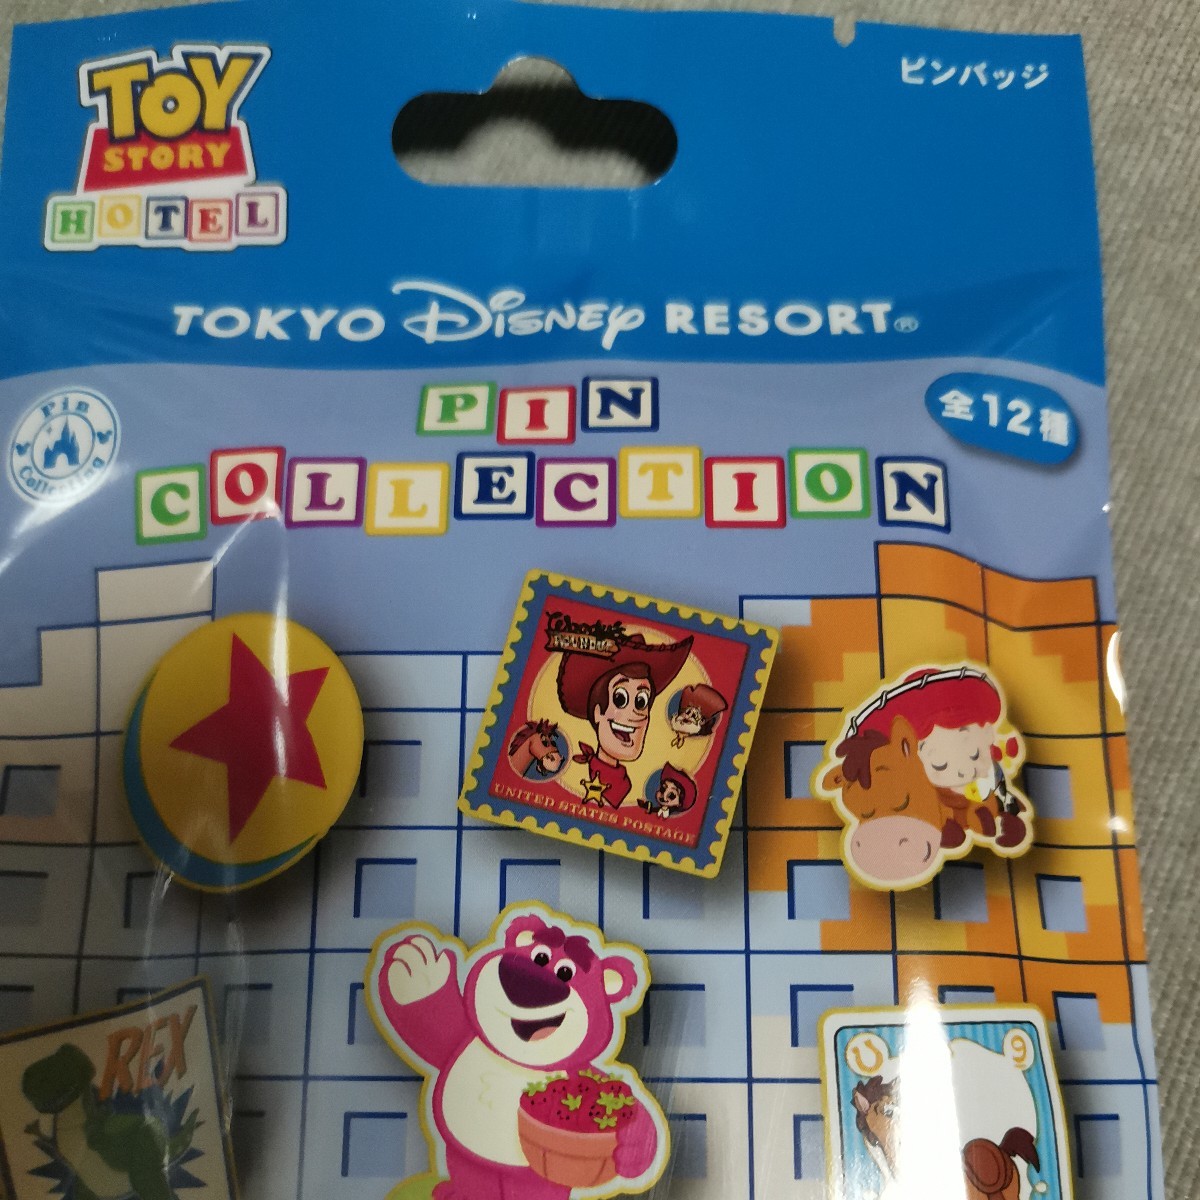  Toy Story hotel pin badge 2 piece entering 2 sack set all 12 kind TOKYO Disney resort TOY STORY HOTEL pin collection 